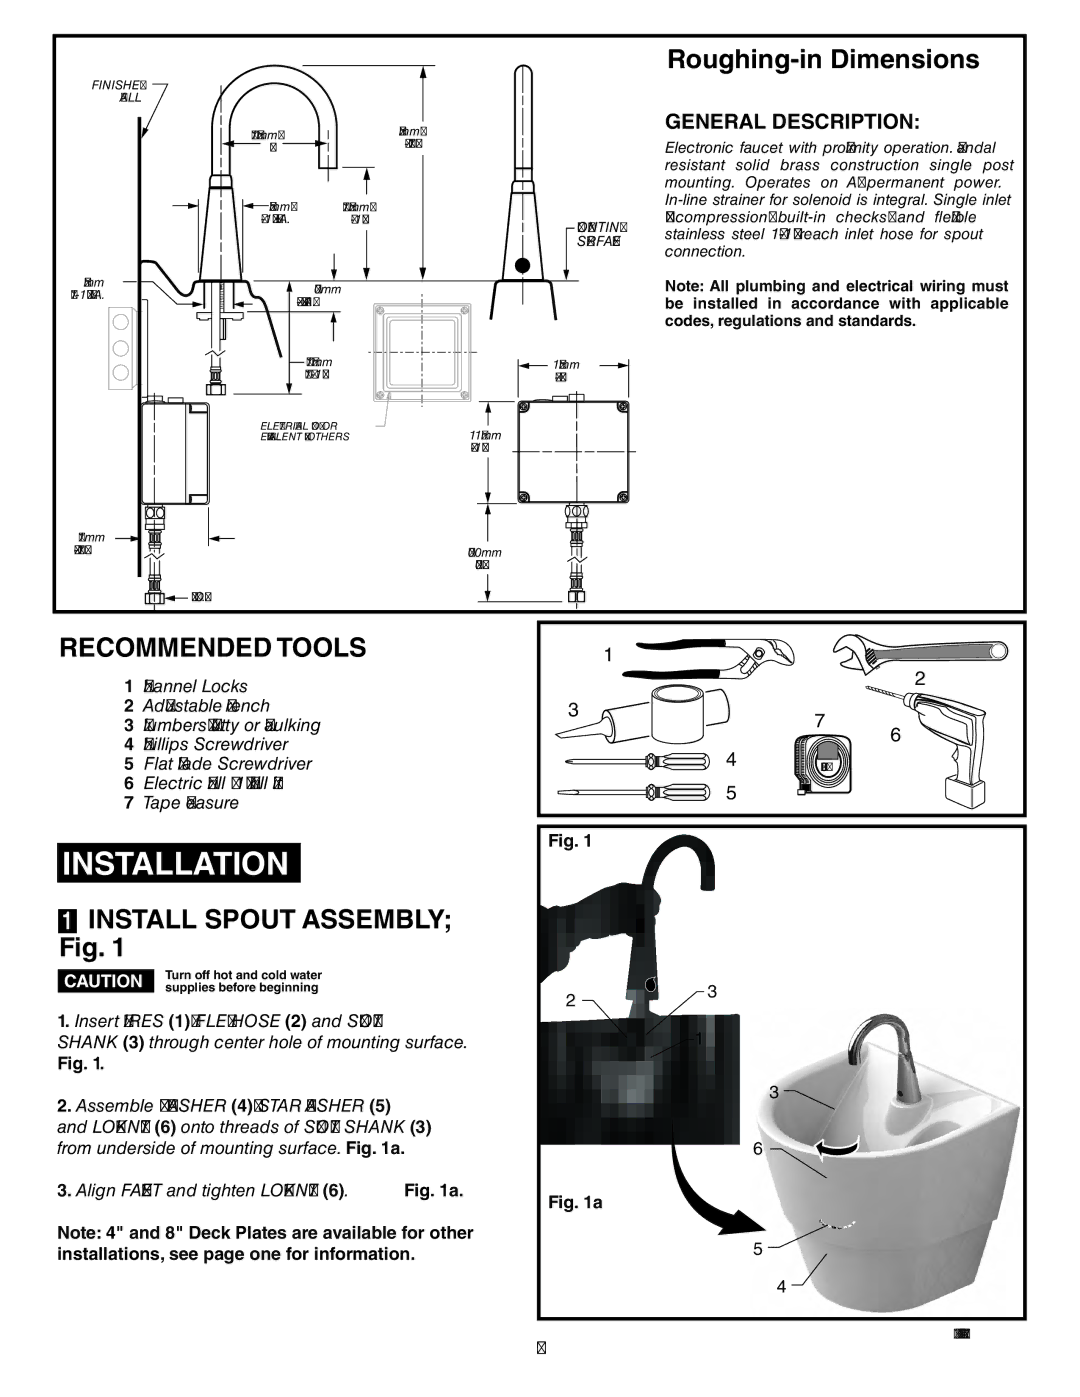 American Standard 6059.193 Installation, Roughing-in Dimensions, Recommended Tools, Install Spout Assembly Fig 